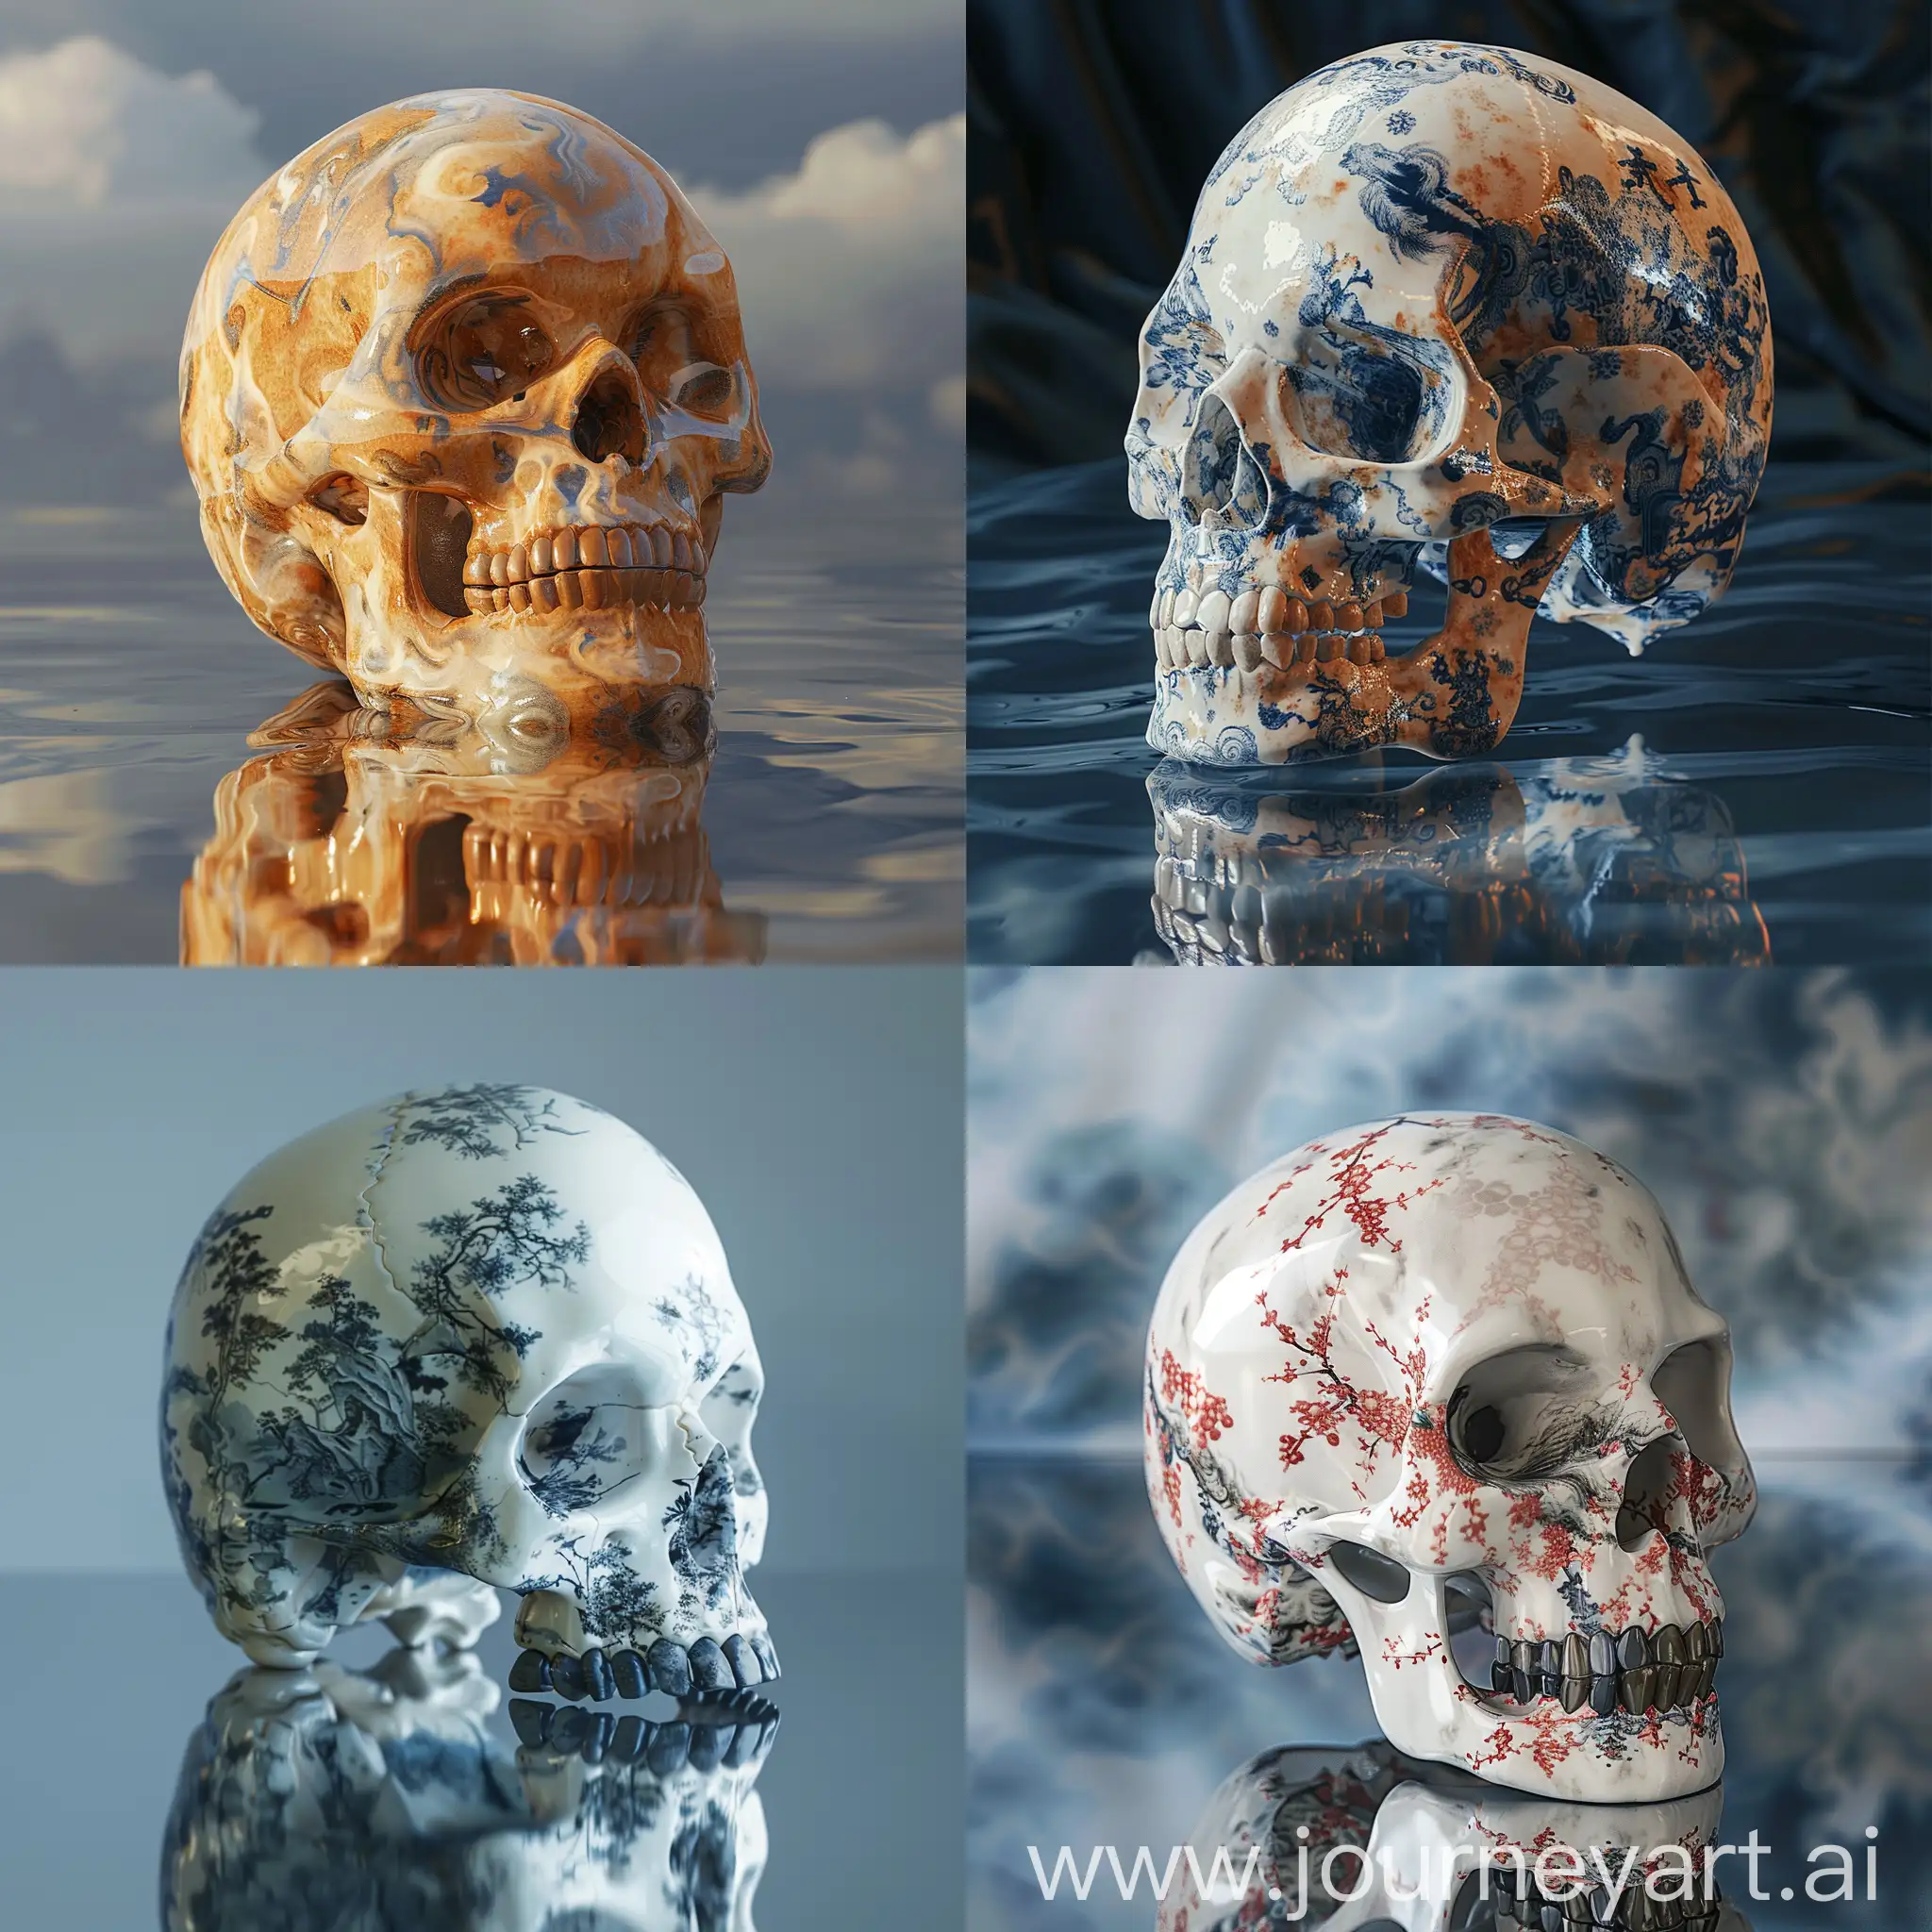 Chinese-Ceramic-Skull-on-Reflective-Surface-UltraRealistic-16K-Cybernetic-Rendering